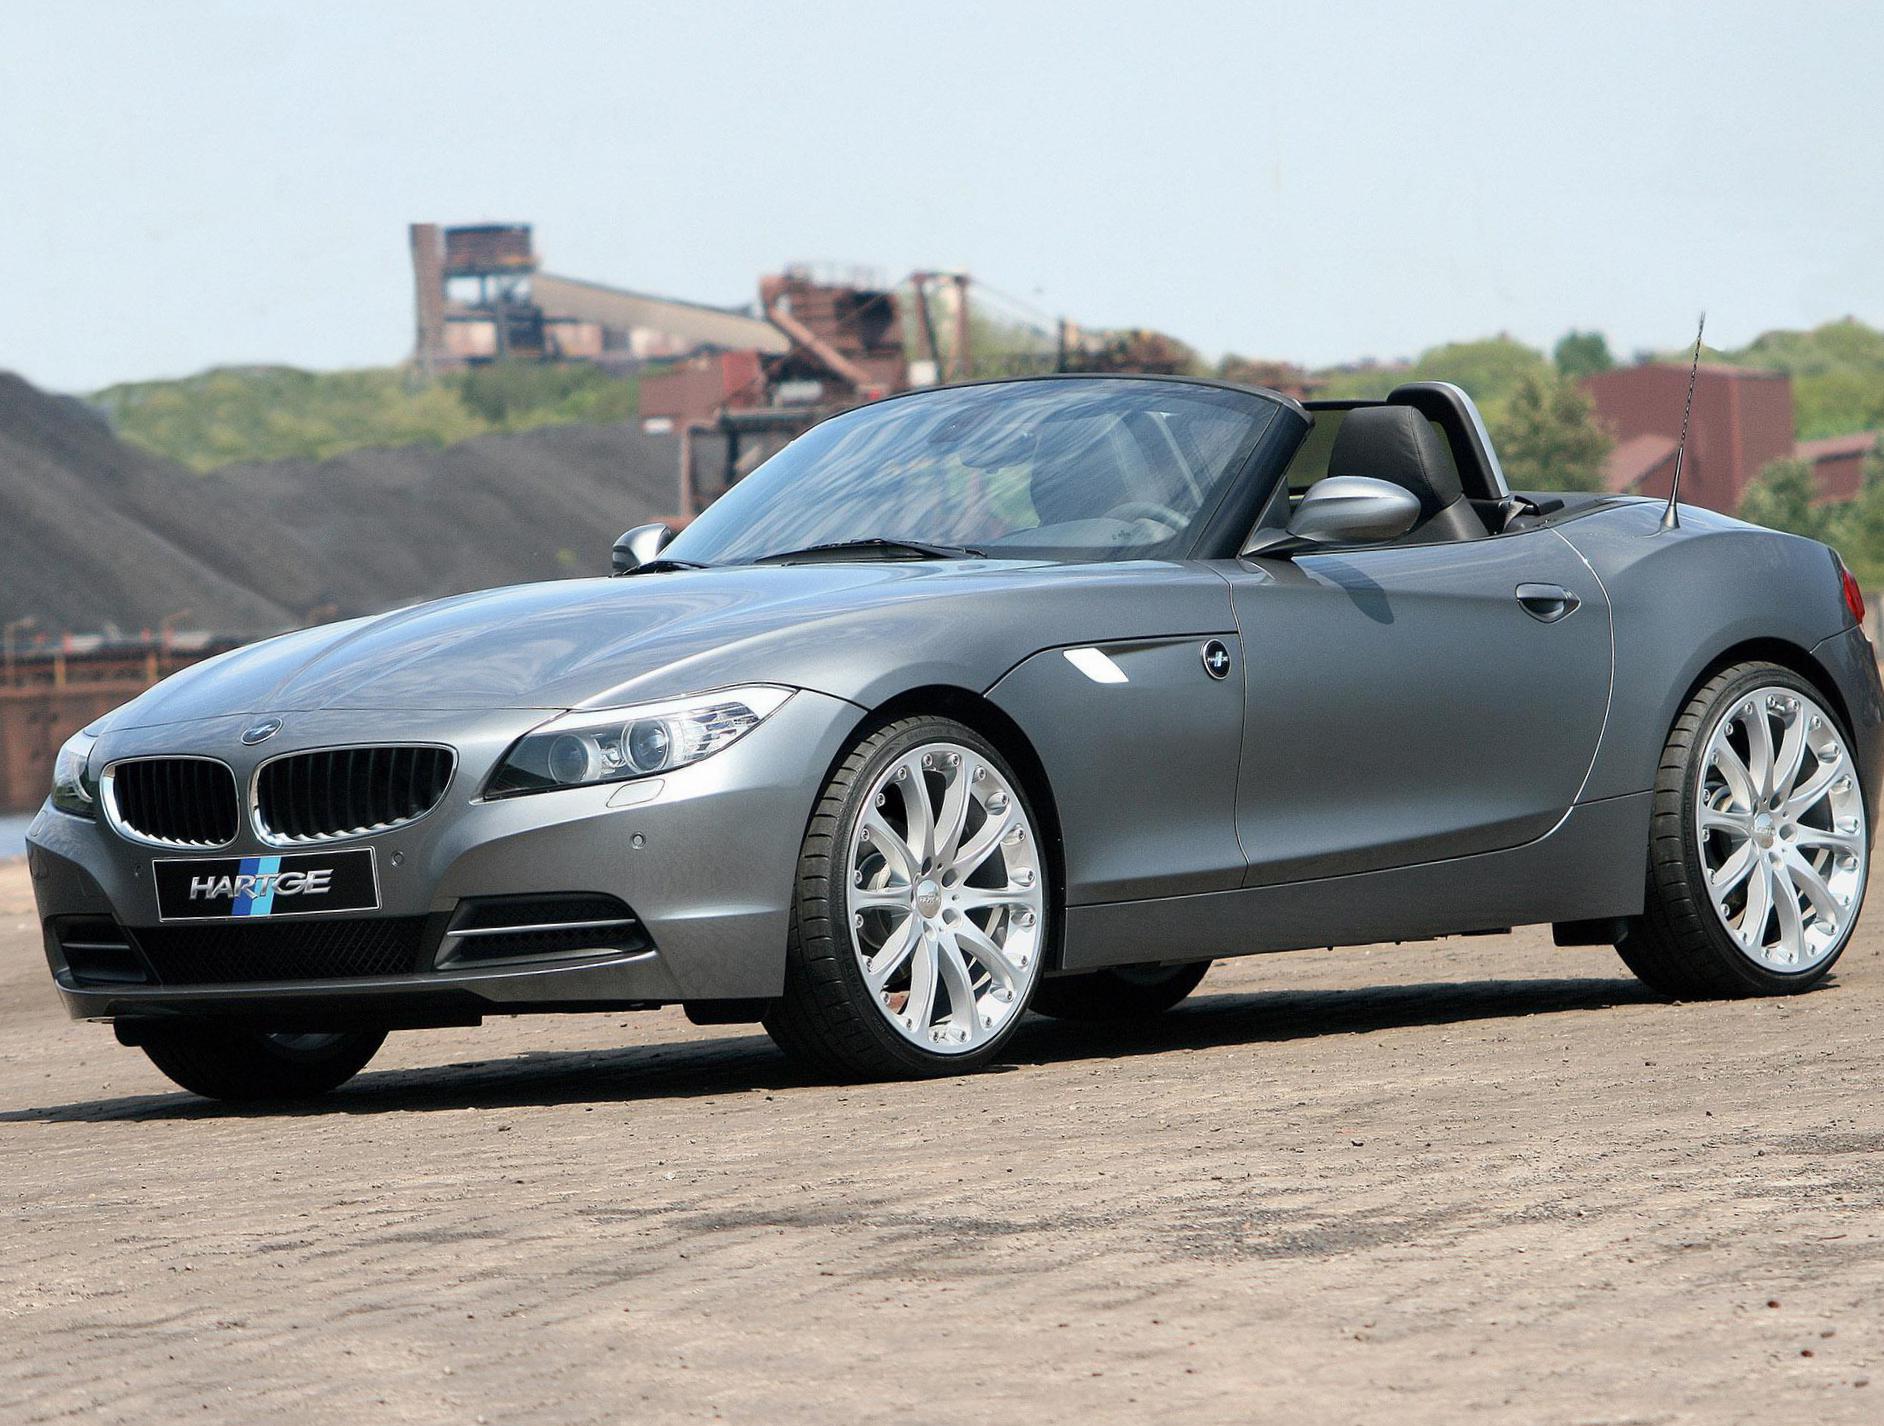 BMW Z4 Roadster (E89) Photos and Specs. Photo Z4 Roadster